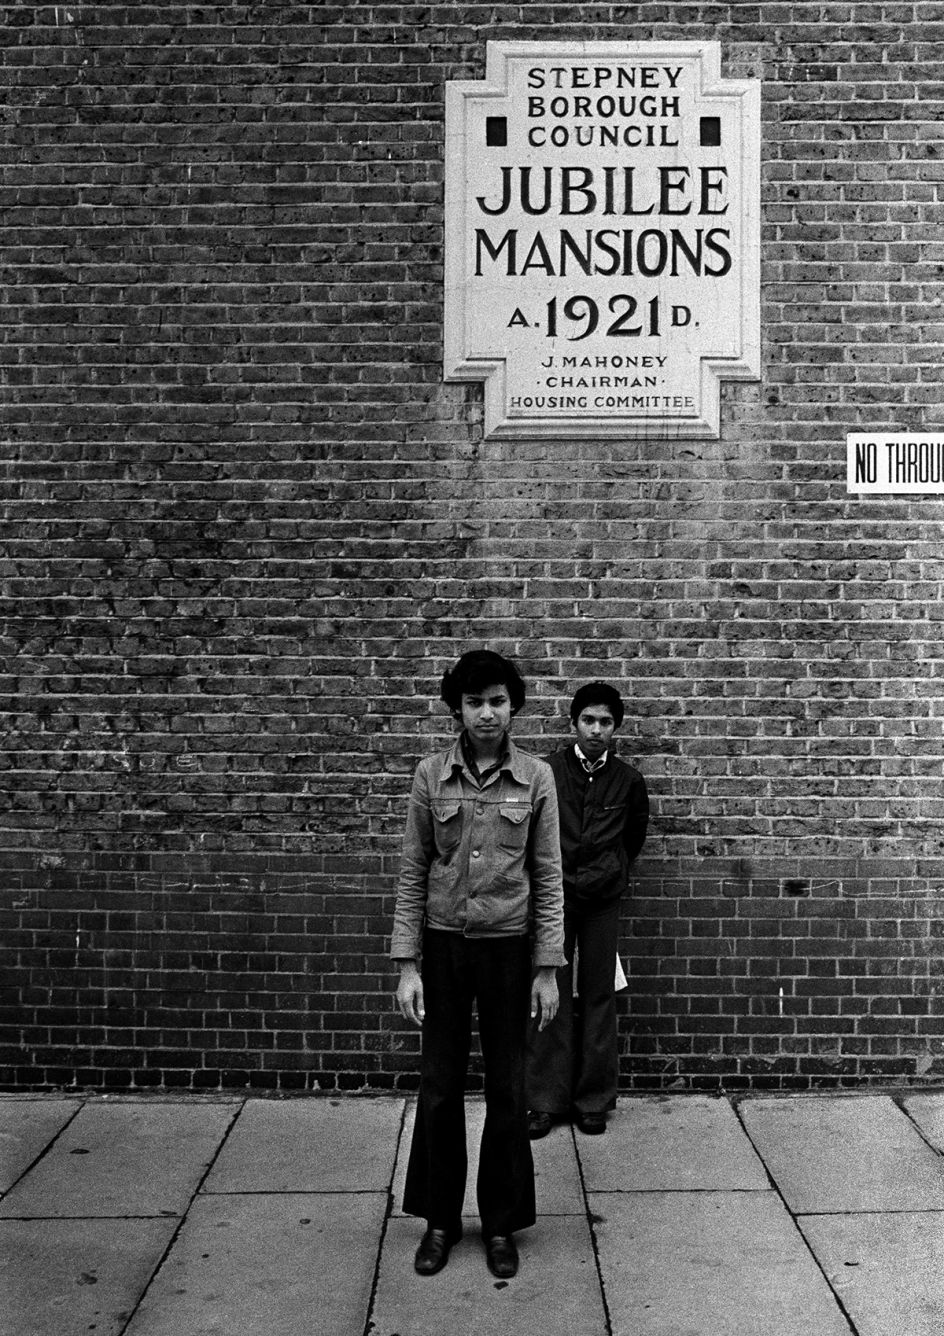 Jubilee Street, Stepney, London 1977. The photograph was taken during the celebrations of Queen Elizabeth II Silver Jubilee as a statement of reaction to Britain’s multiculturalism